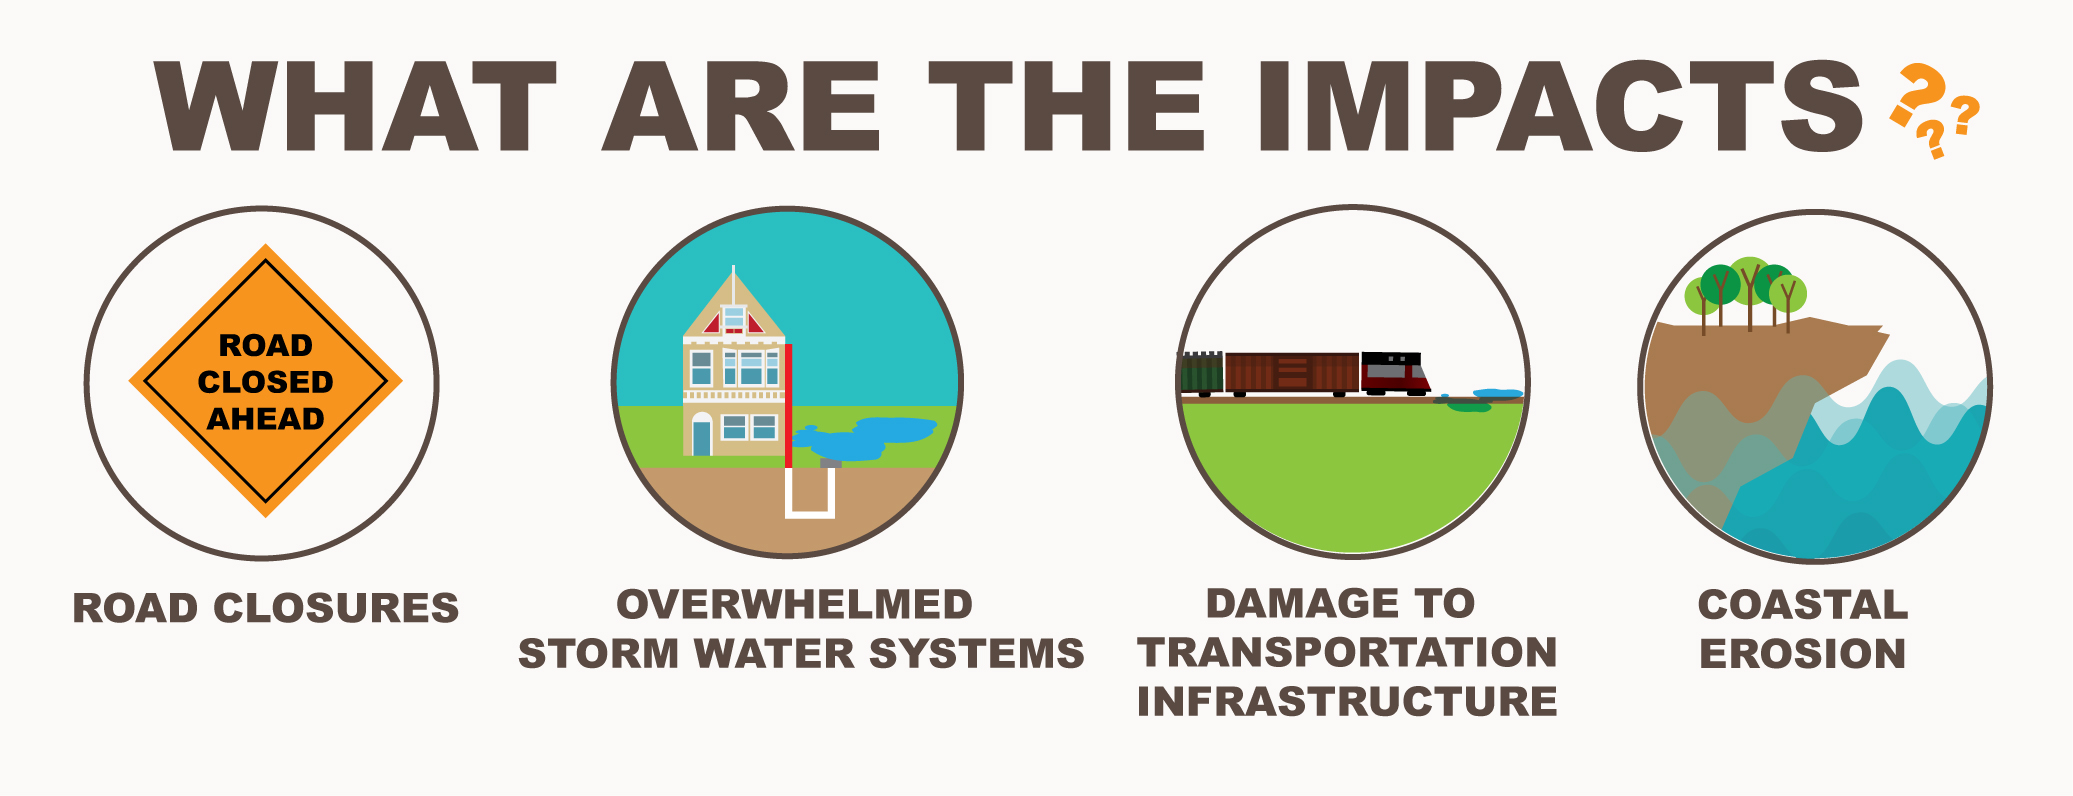 Graphic showing the impacts of nuisance flooding, including road closures, overwhelmed storm water systems, transporation infrastructure, and coastal erosion.